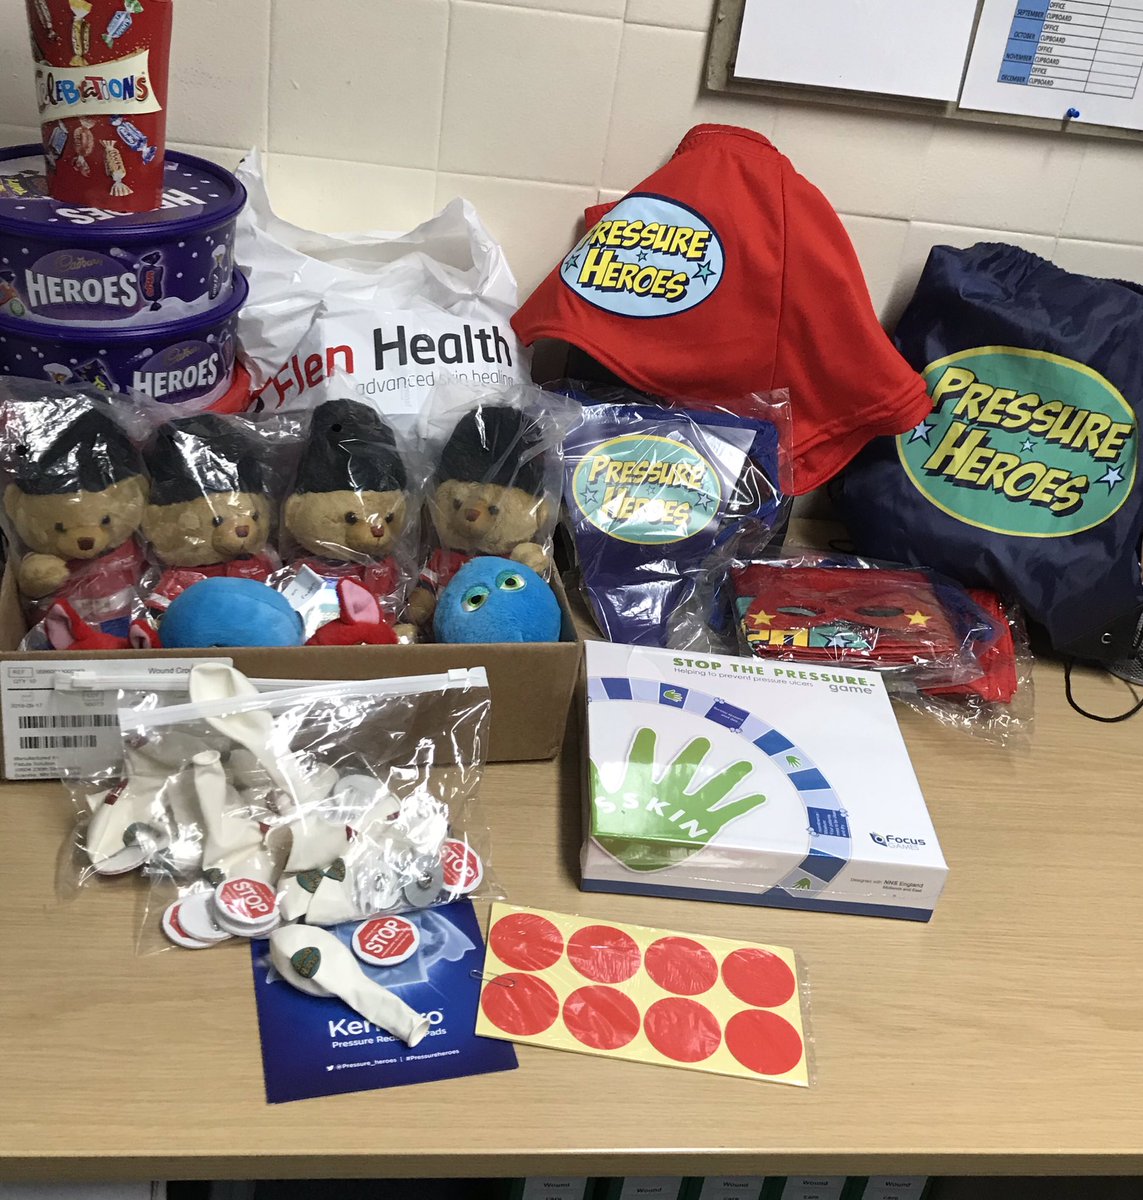 Our TVN team are getting ready for #StopThePressureDay keep an eye out for our pressure heroes flying into a ward near you!!! #superheropants #PressureHeroes @maxinemcvey @FHMedicalMatron @FHFTnursing @LisaABarbier @TraceyCoulson5